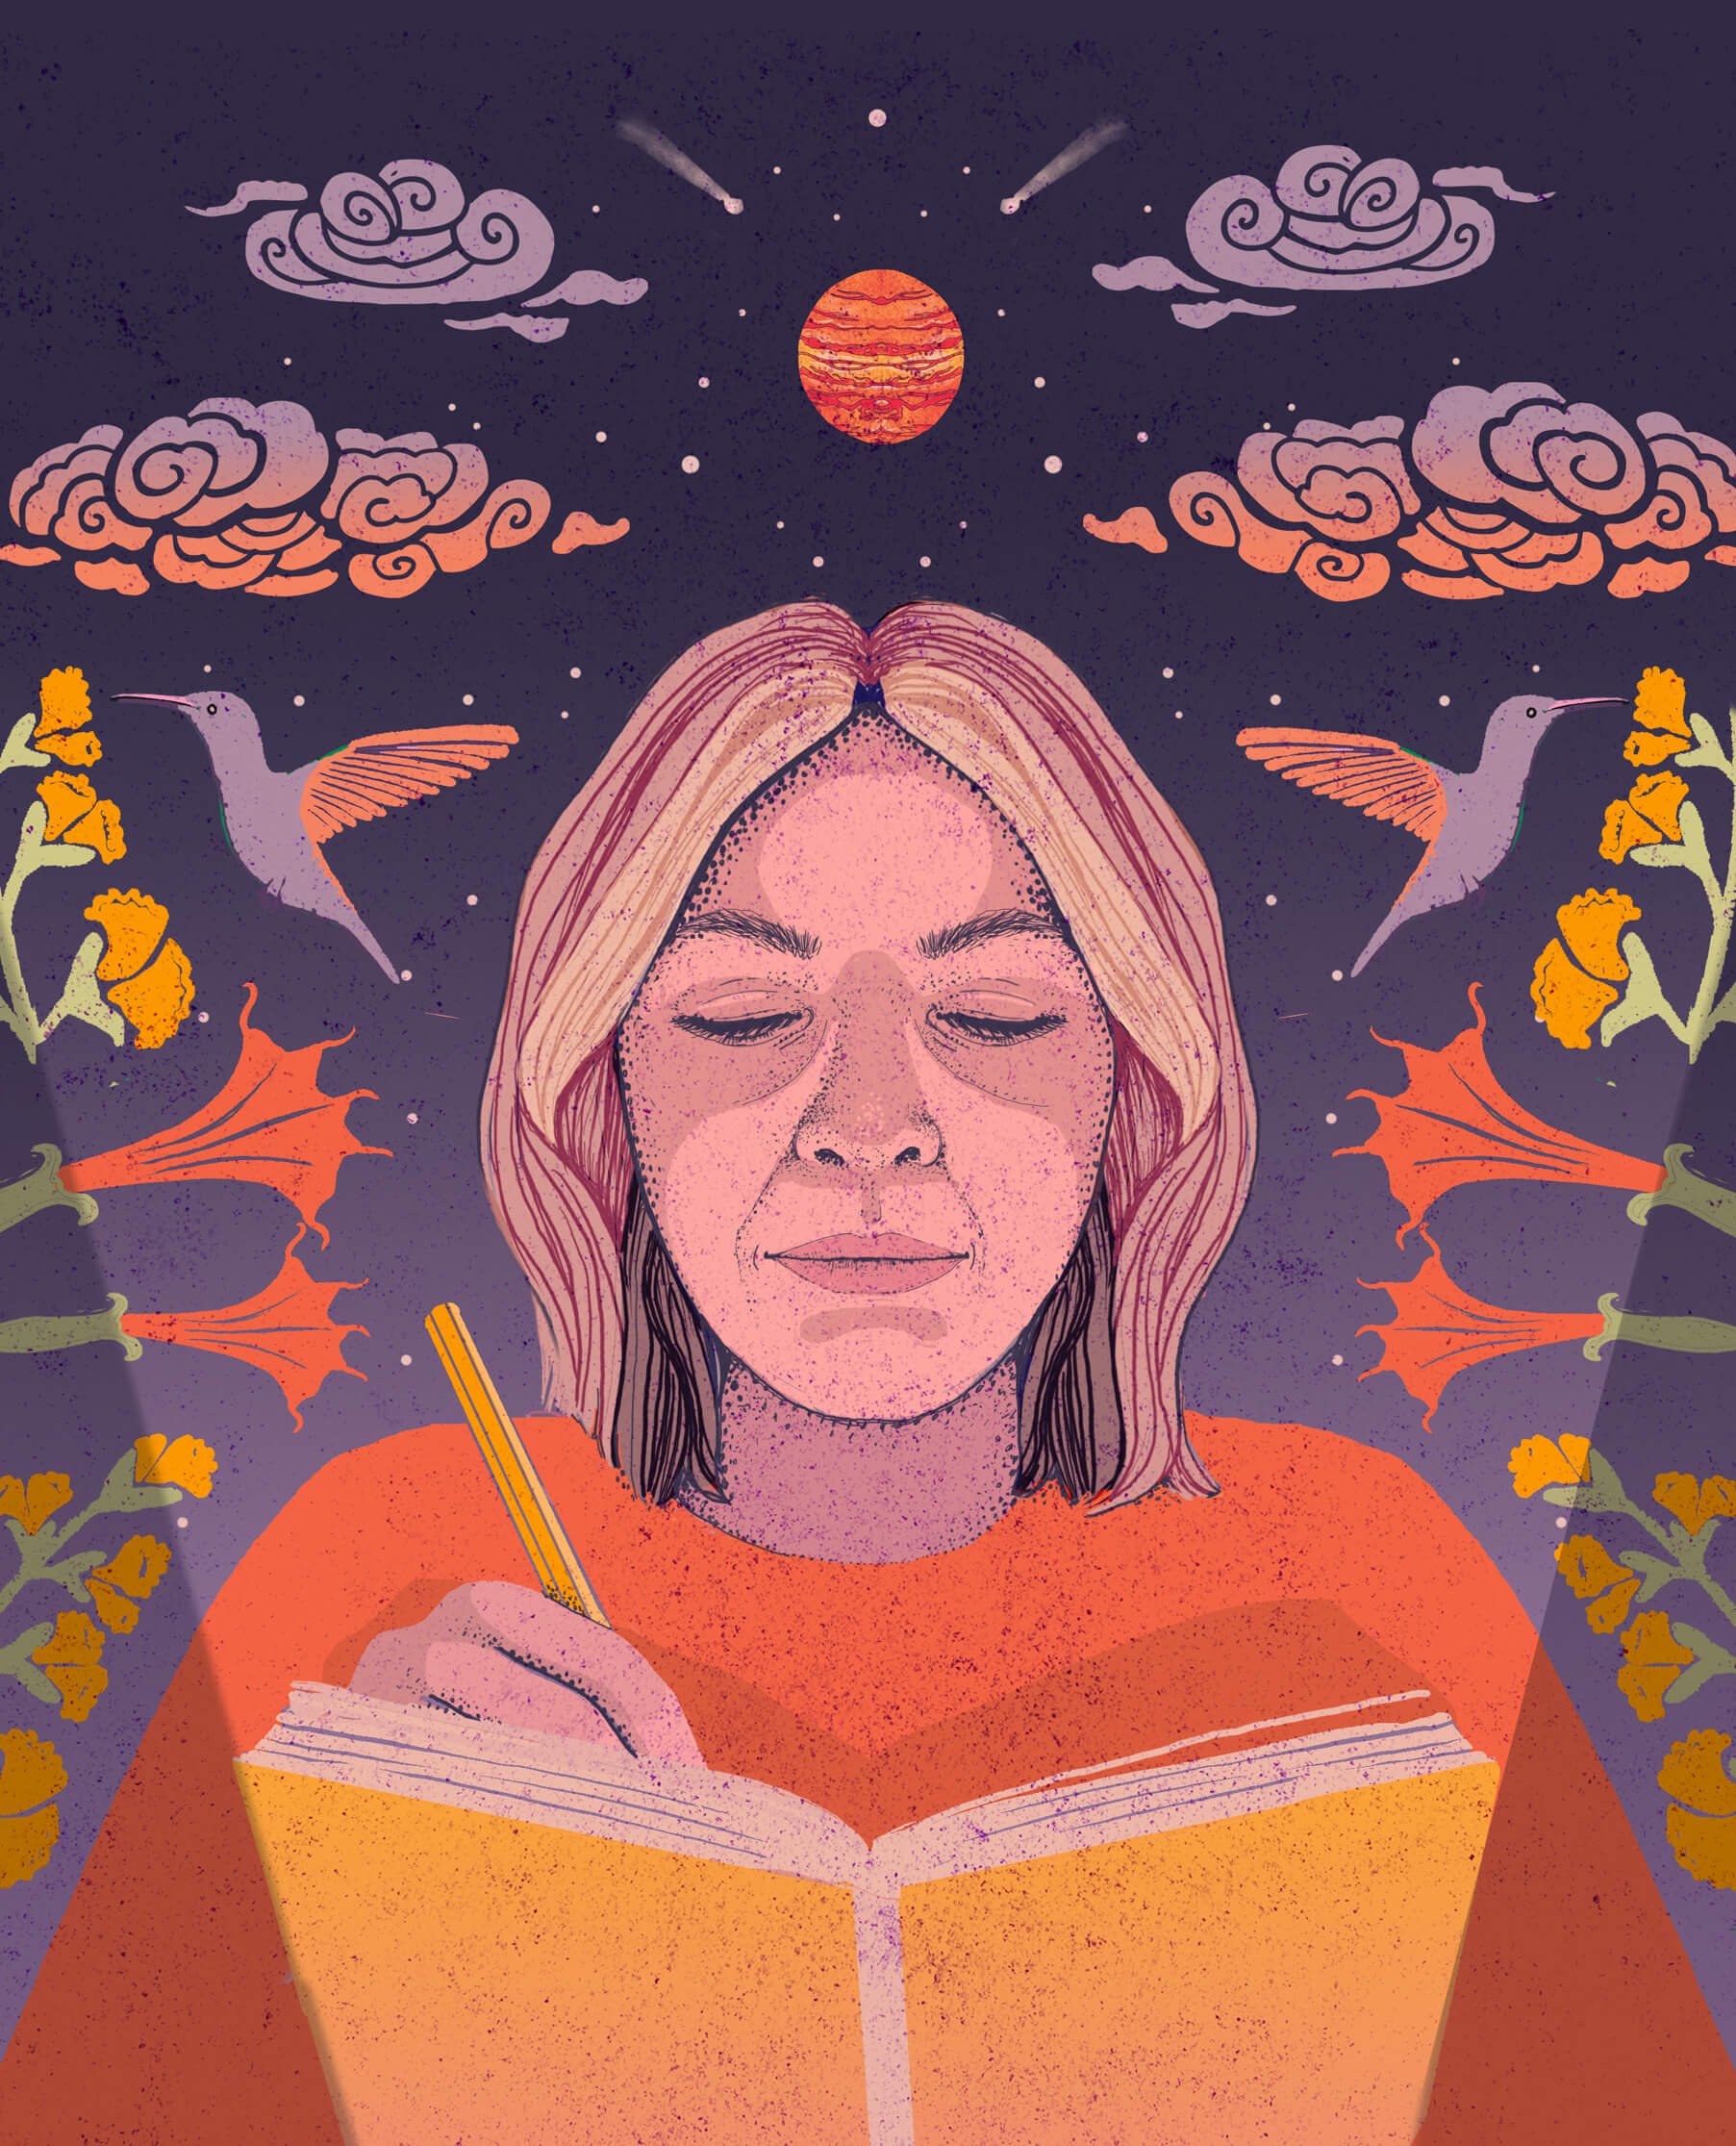  Portrait illustration of illustrator, Lisa Maltby, with symmetry and pattern in the background. The portrait art has a vintage feel with textures and warm colour. 